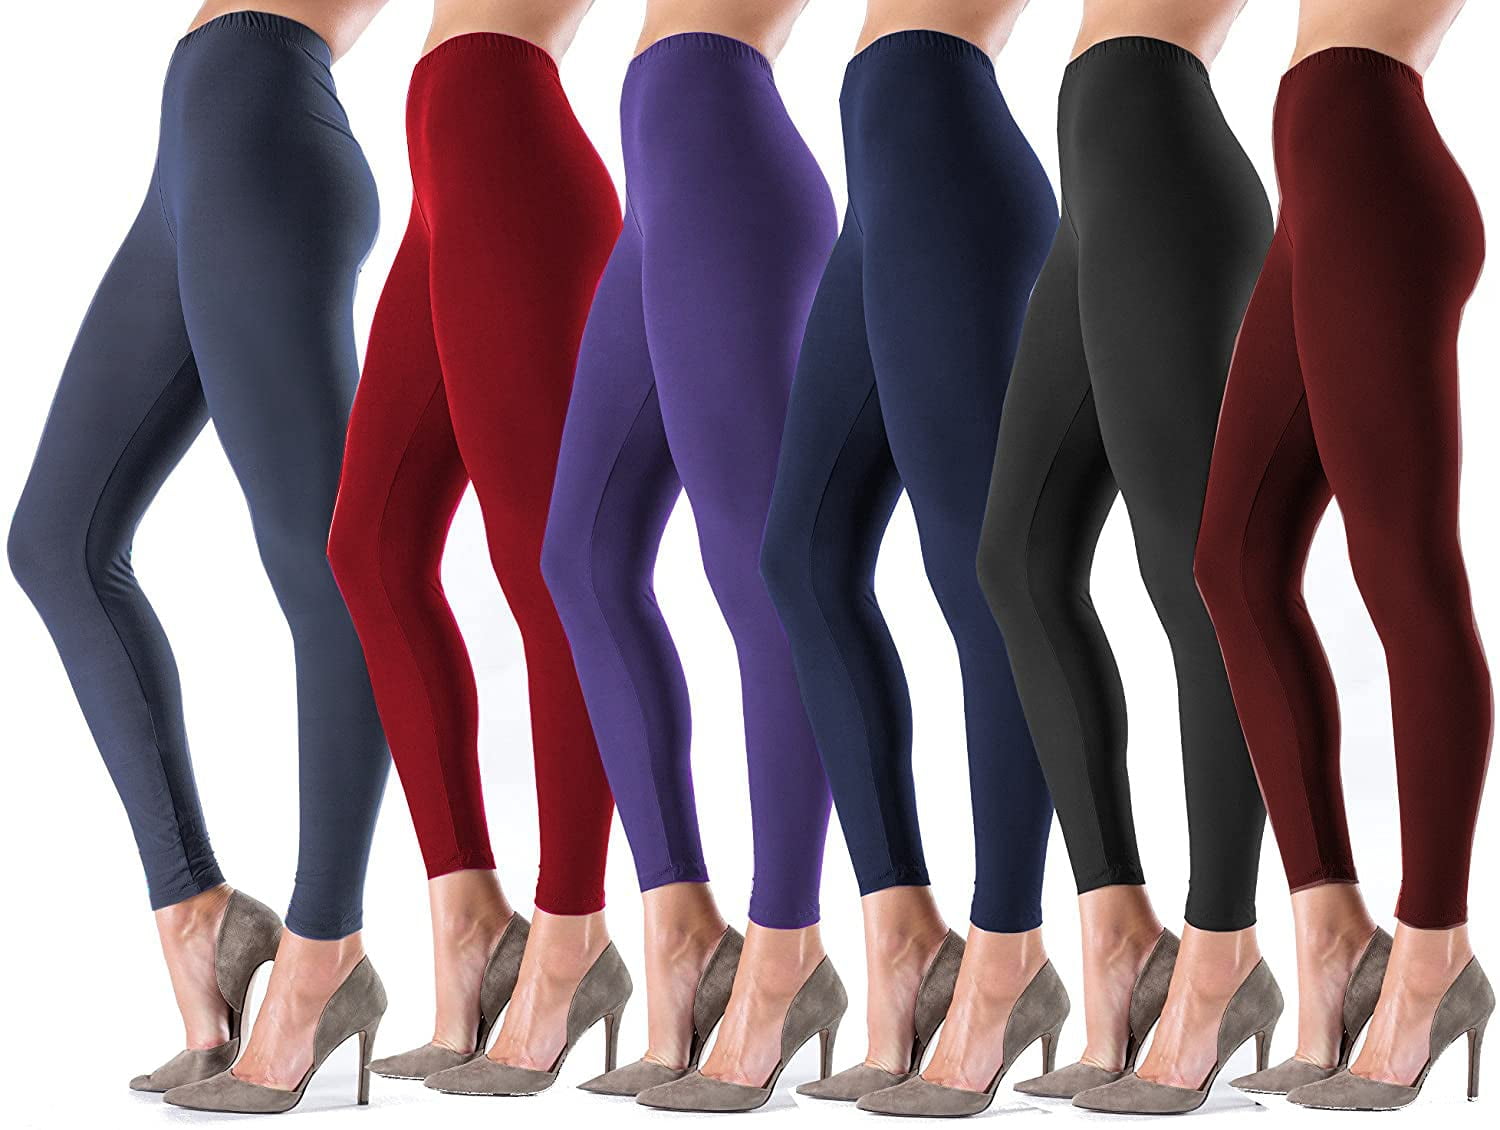 LMB Lush Moda Women's Leggings Basic Polyester - Extra Buttery Soft in  Variety of Colors for Casual Wear, Lounging, Yoga, Exercise, Layering  6-Pack (Black-Brown-Burg-Charcoal Grey-Navy-Purple) 1X - 3X 